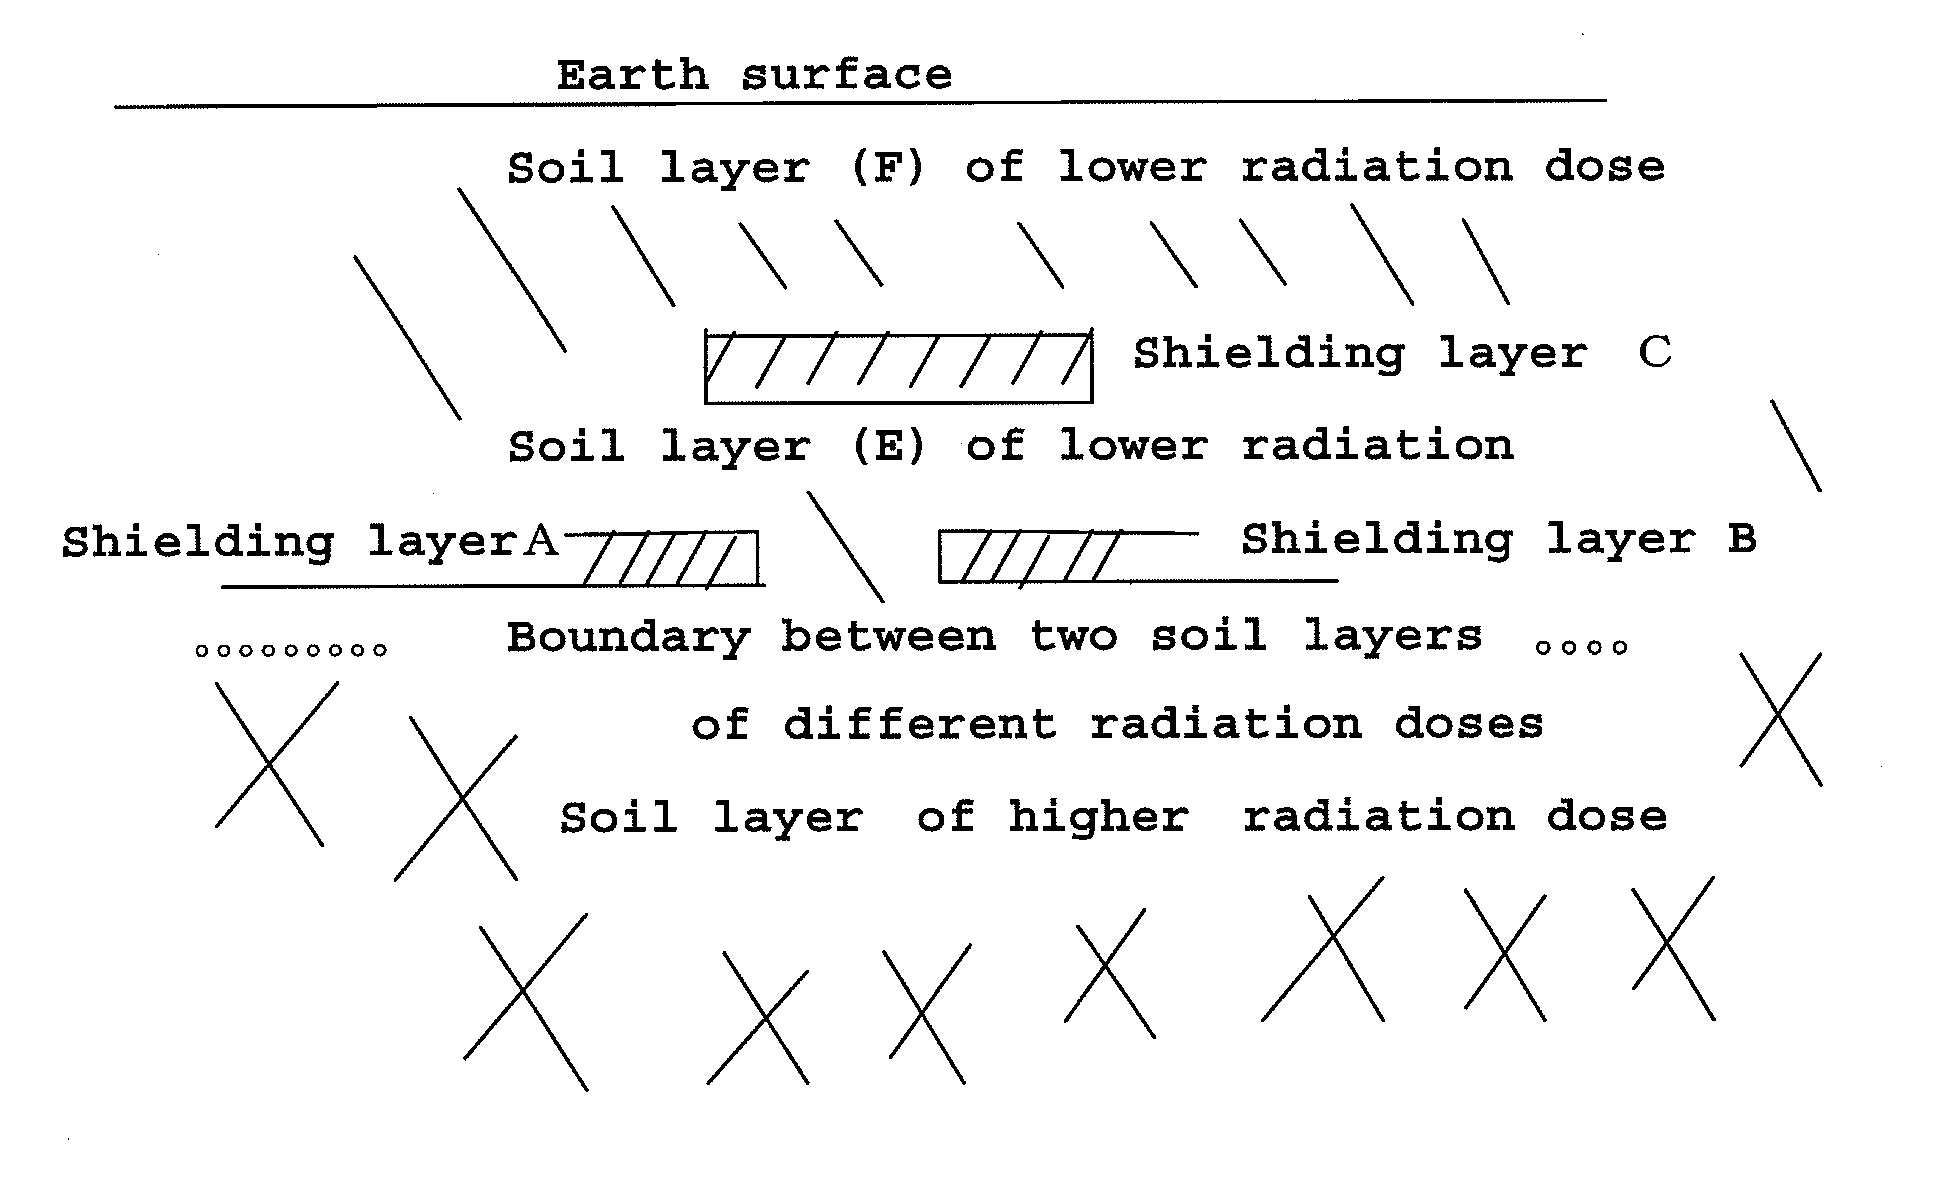 Shielding material used for shielding of radiation and method for shielding a radiation emitted from earth surface using the shielding material